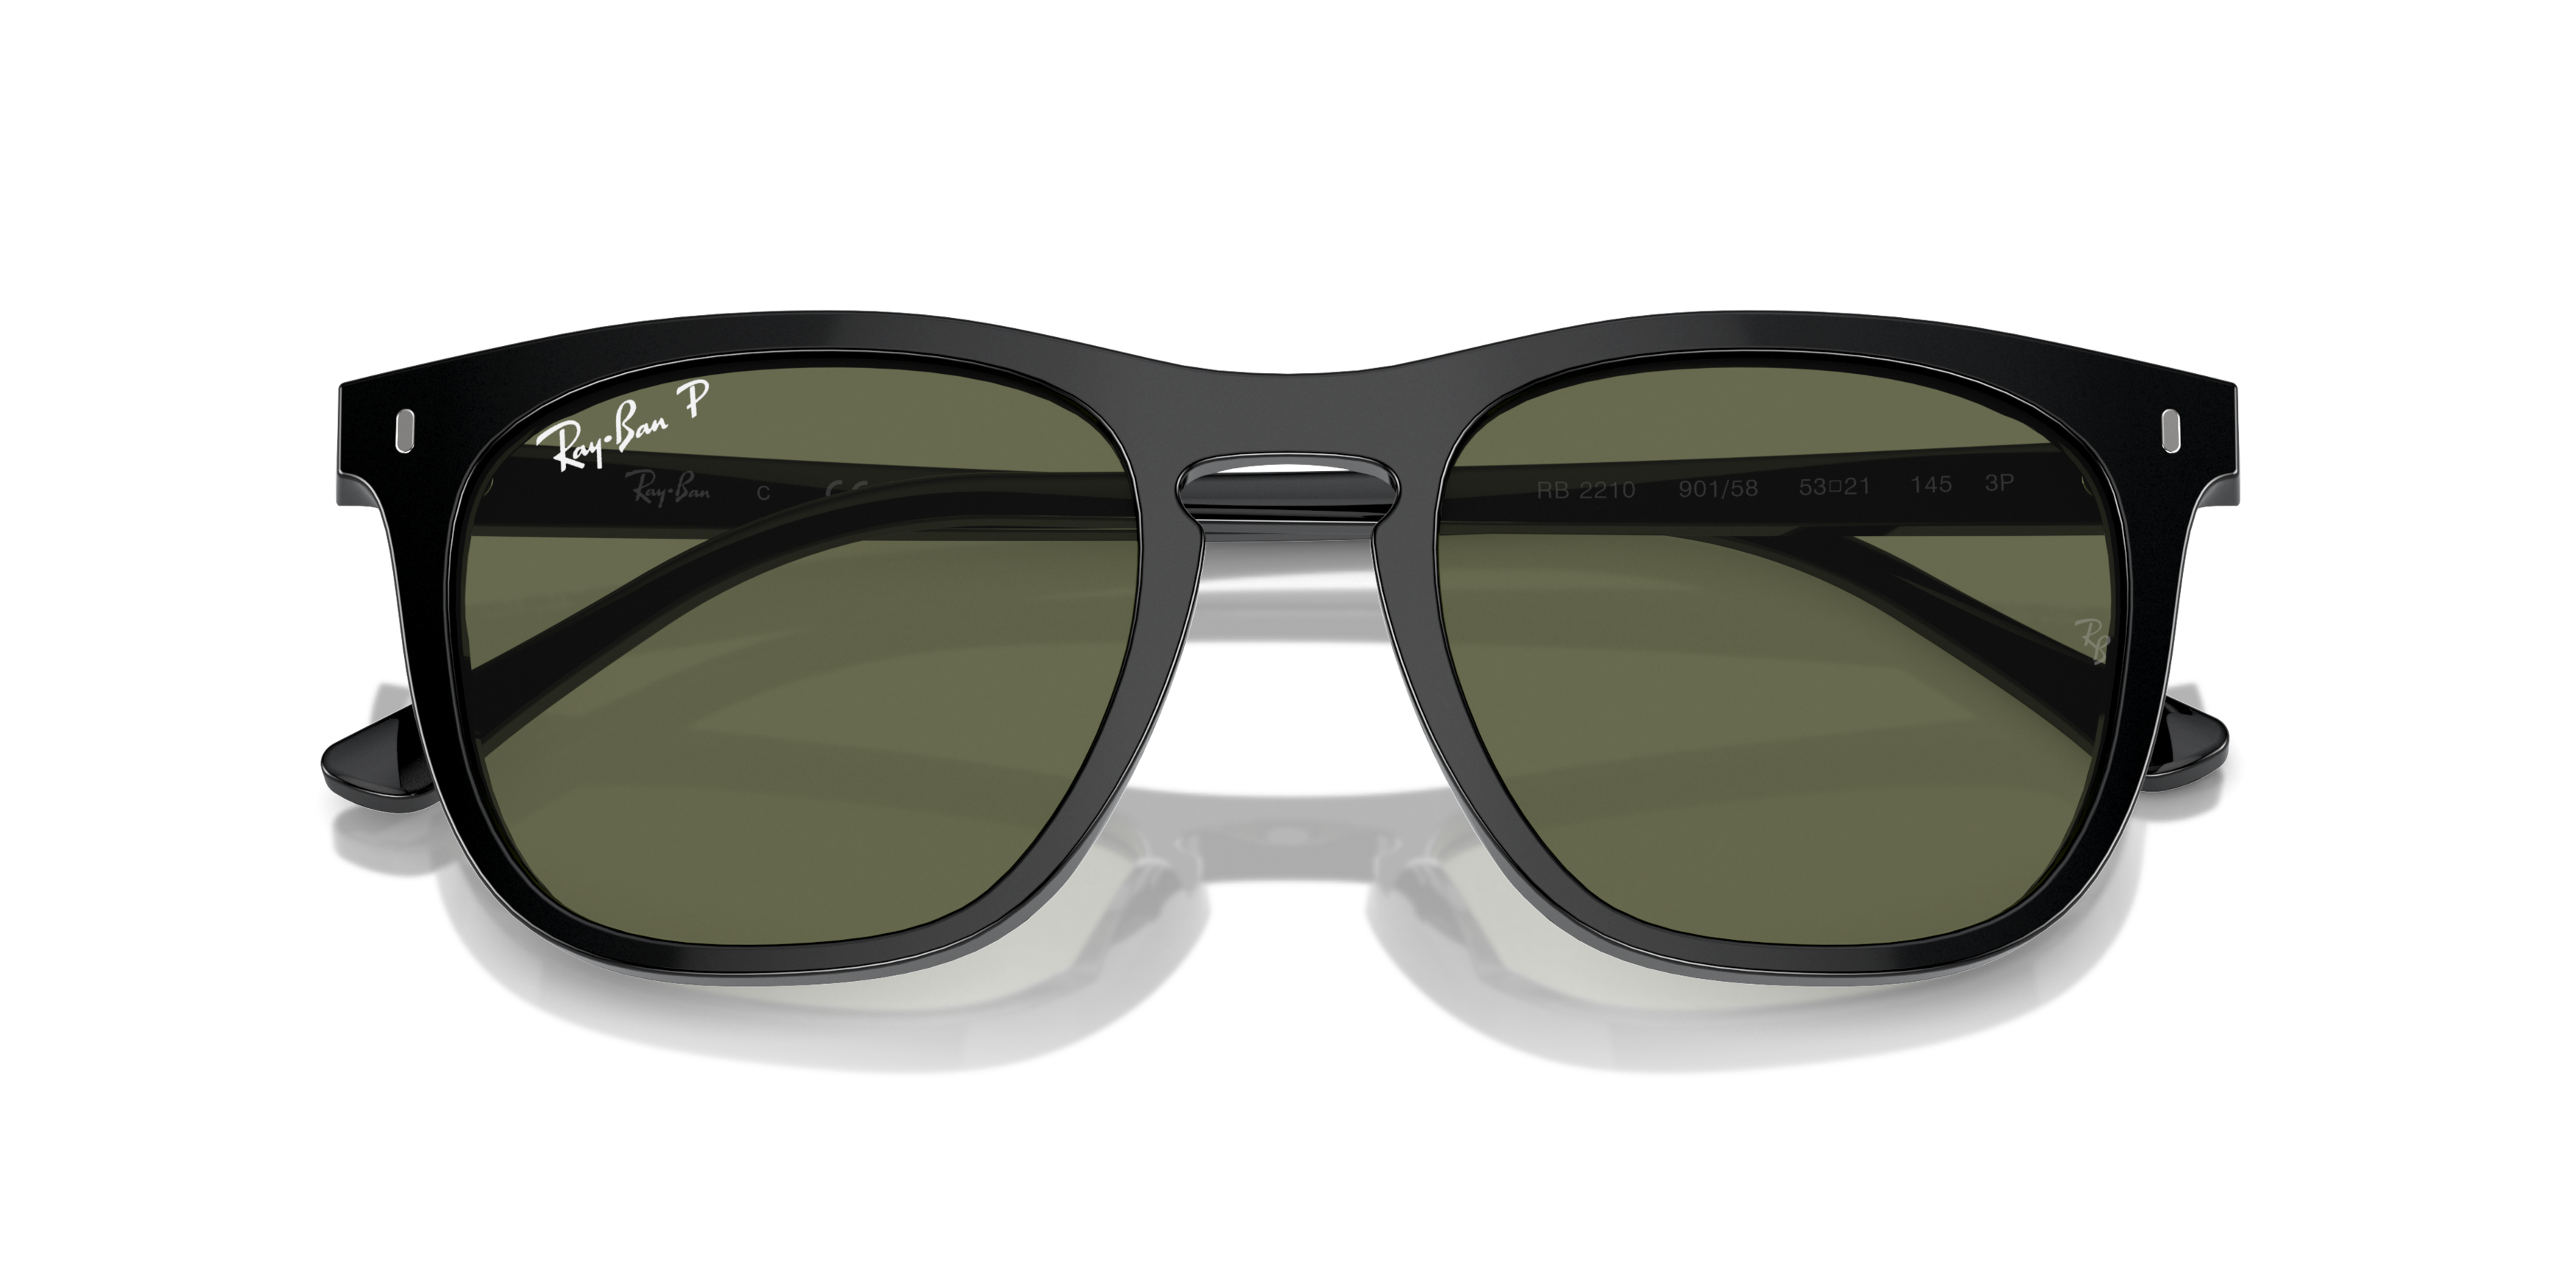 [products.image.folded] Ray-Ban RB 2210 Sunglasses